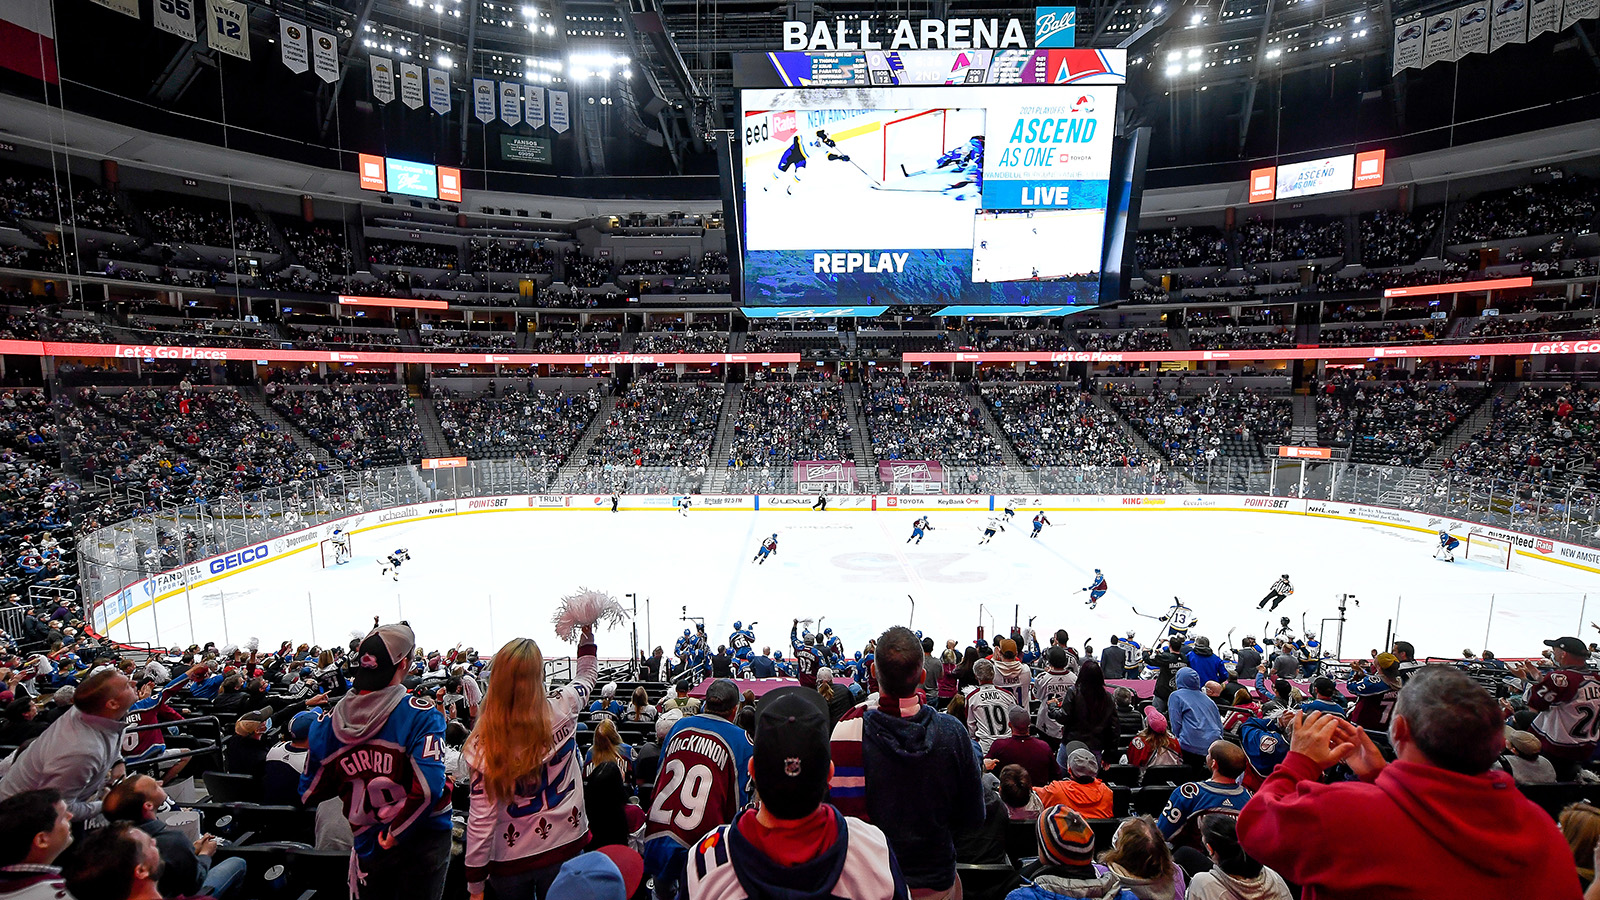 A general view of Ball Arena with approximately 7,750 fans in attendance during the Stanley Cup Playoffs first round game between the St. Louis Blues and the Colorado Avalanche at Ball Arena.